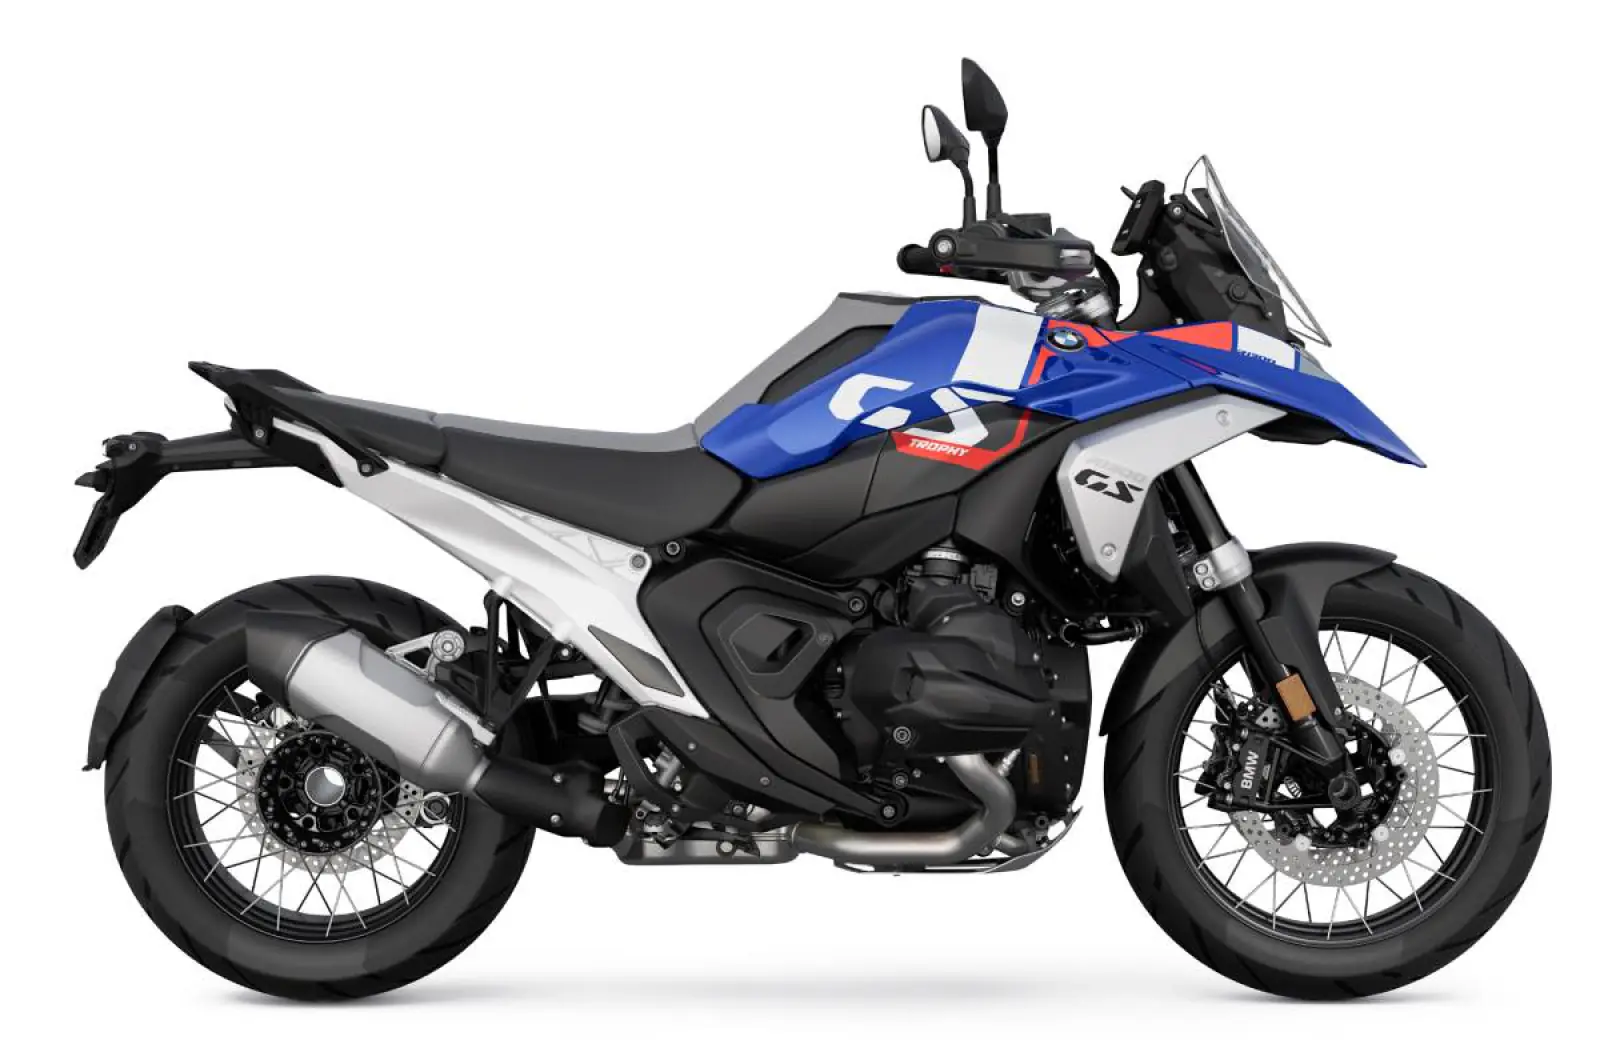 New-Gen BMW R 1300 GS unveiled, will be launched in the Indian market next month